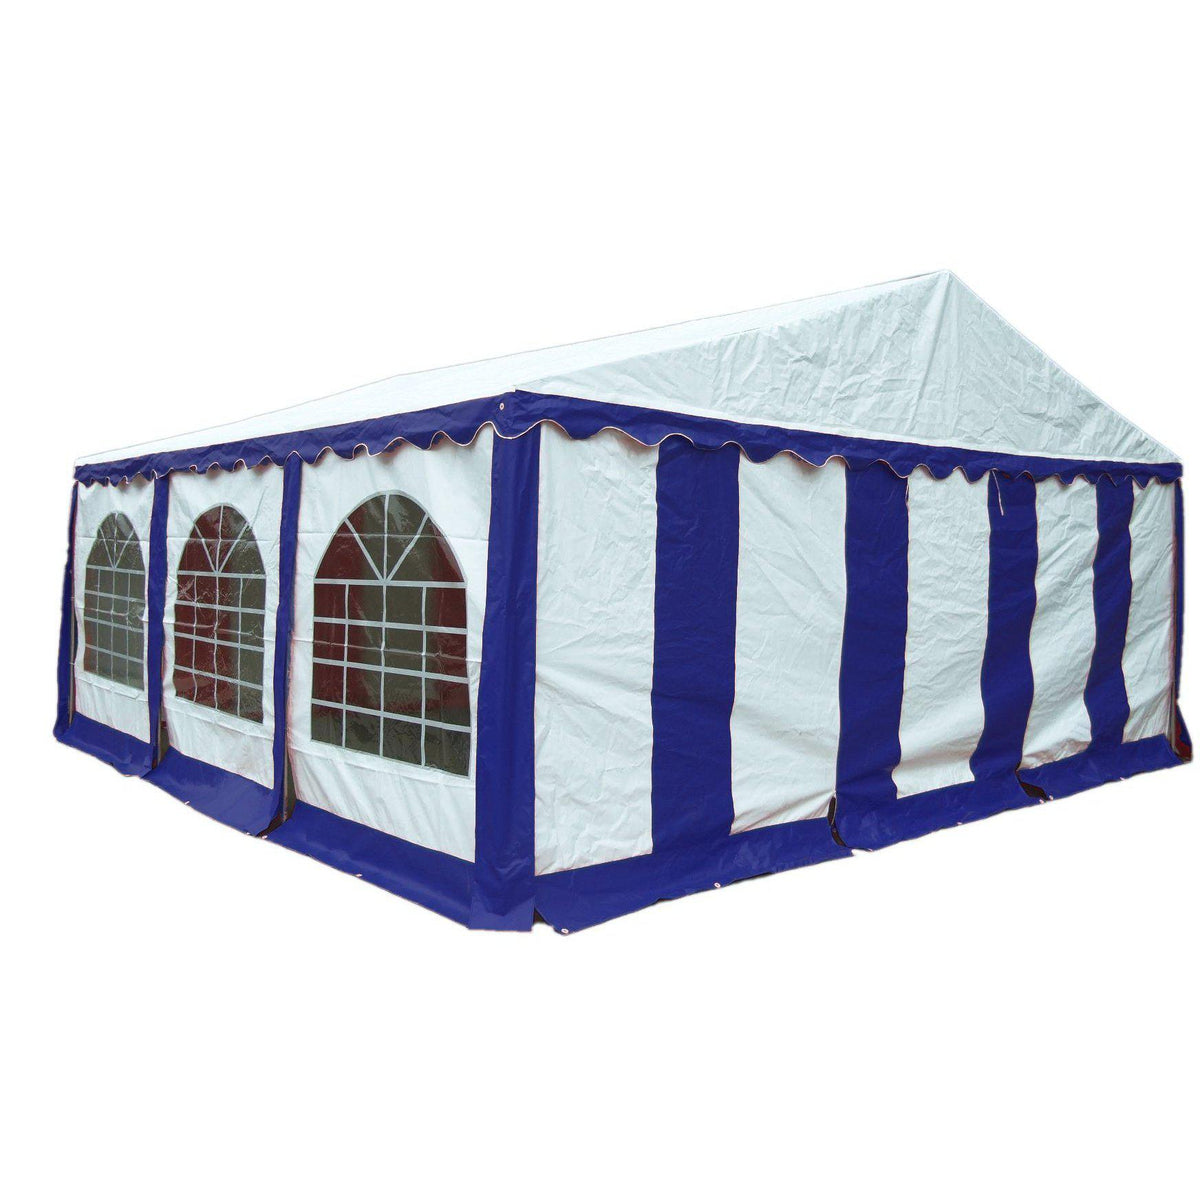 ShelterLogic Enclosure Kit with Windows, Blue/White, 20 x 20 ft. (Party Tent Cover and Frame Sold Separately)